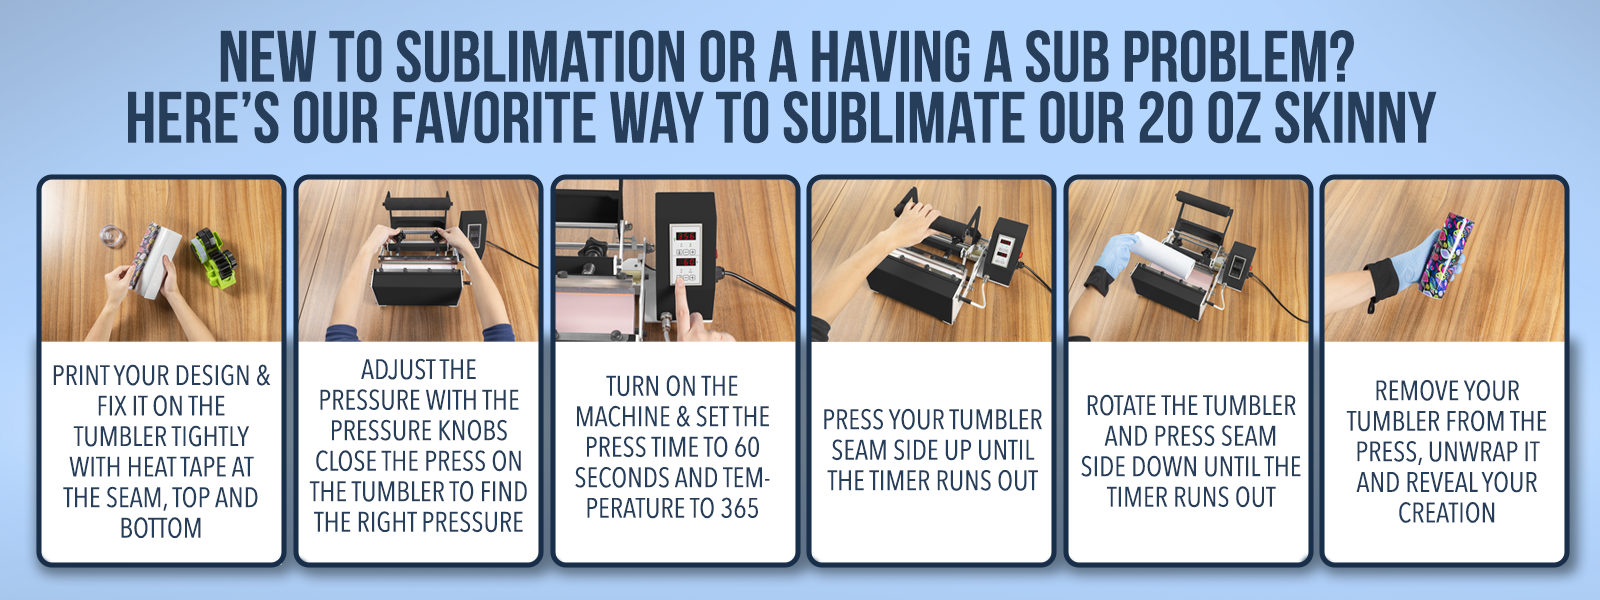 NEW TO SUBLIMATION OR A HAVING A SUB PROBLEM? HERE'S OUR FAVORITE WAY TO SUBLIMATE OUR 20 OZ SKINNY